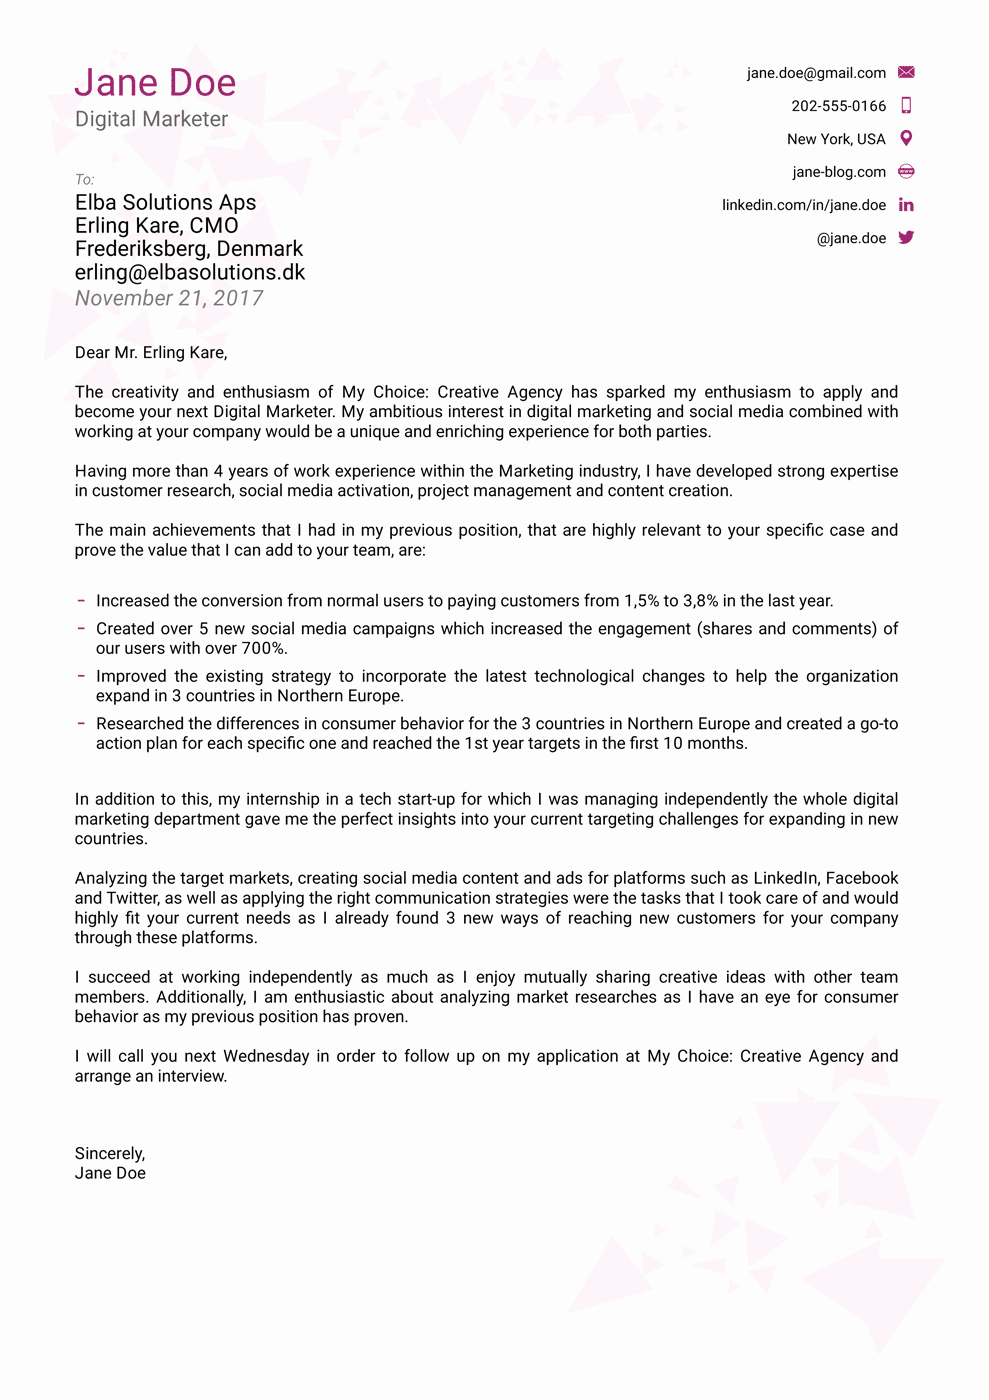 Simple Cover Letter format Elegant 2018 Professional Cover Letter Templates Download now